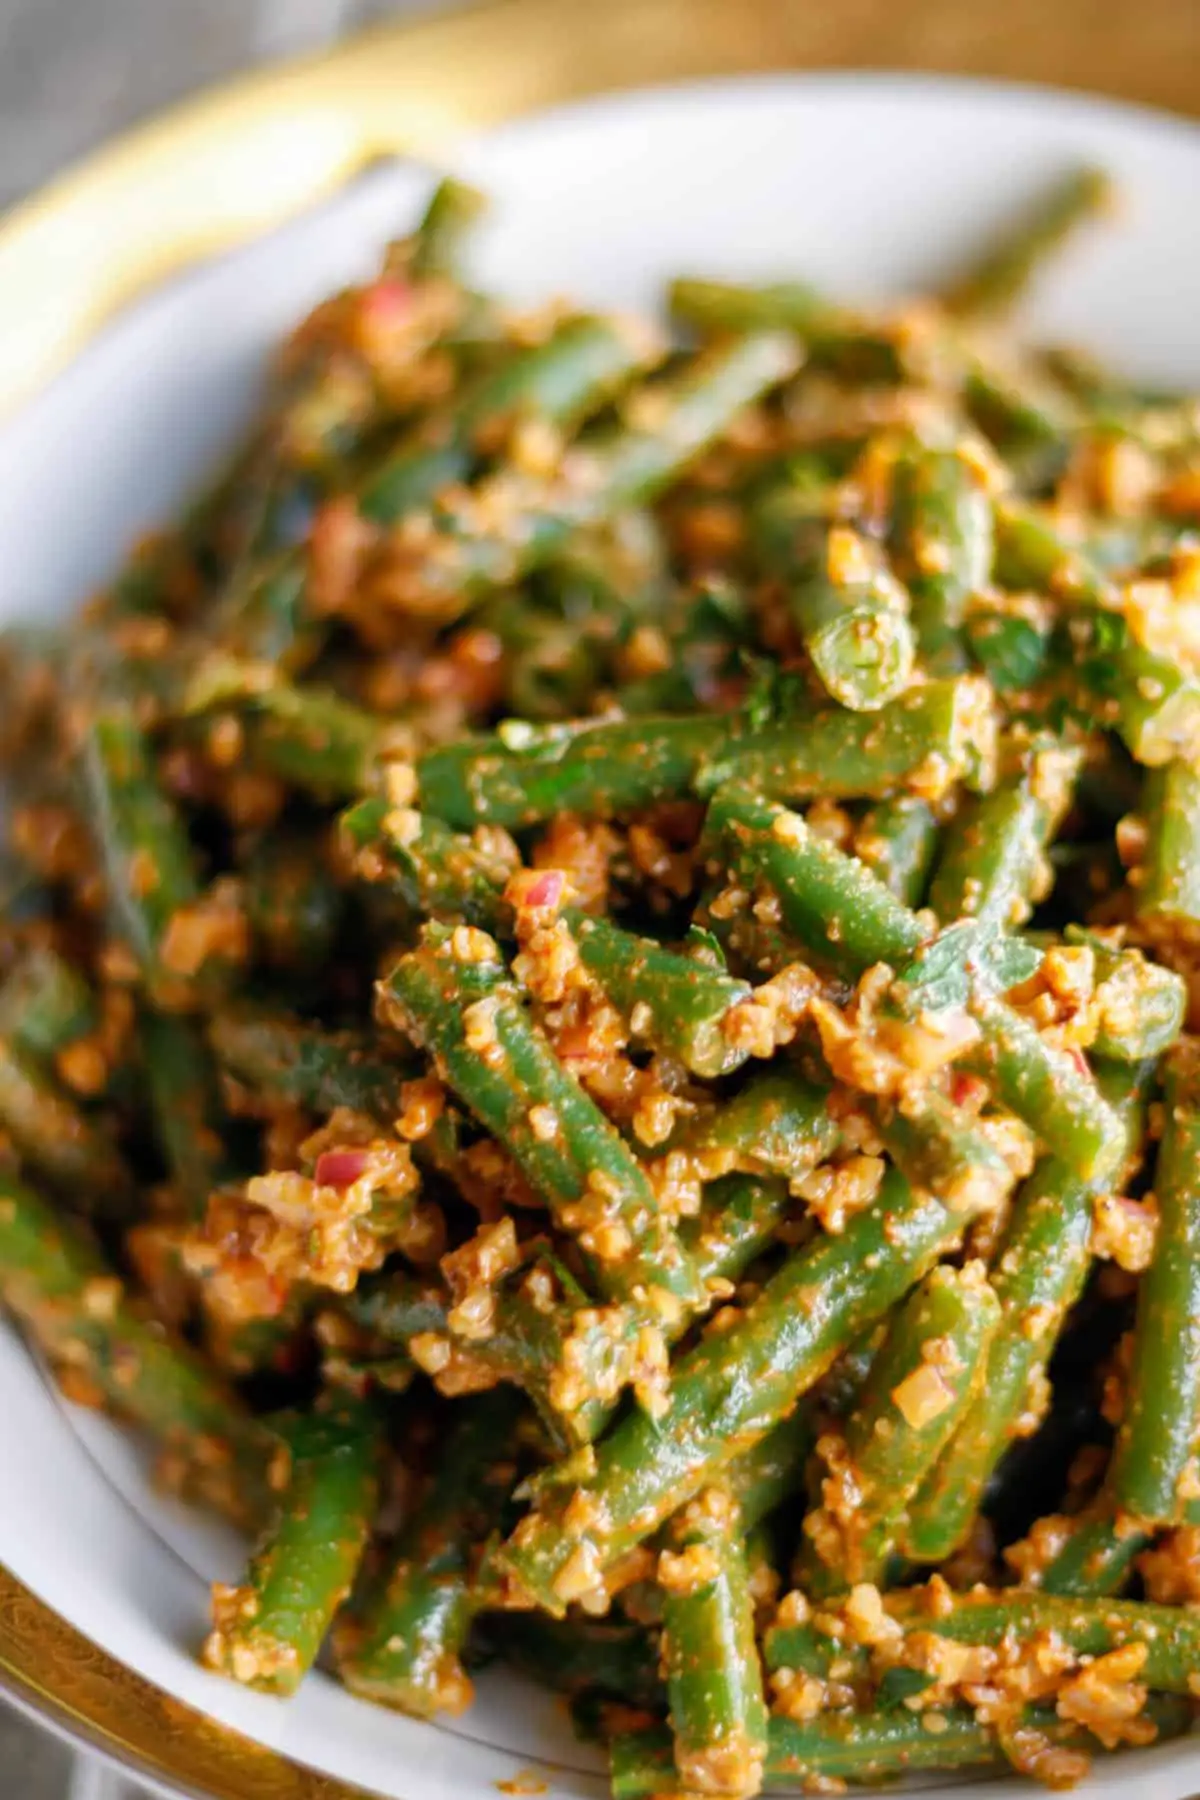 Green beans dressed with a walnut based sauce in a gold rimmed bowl.